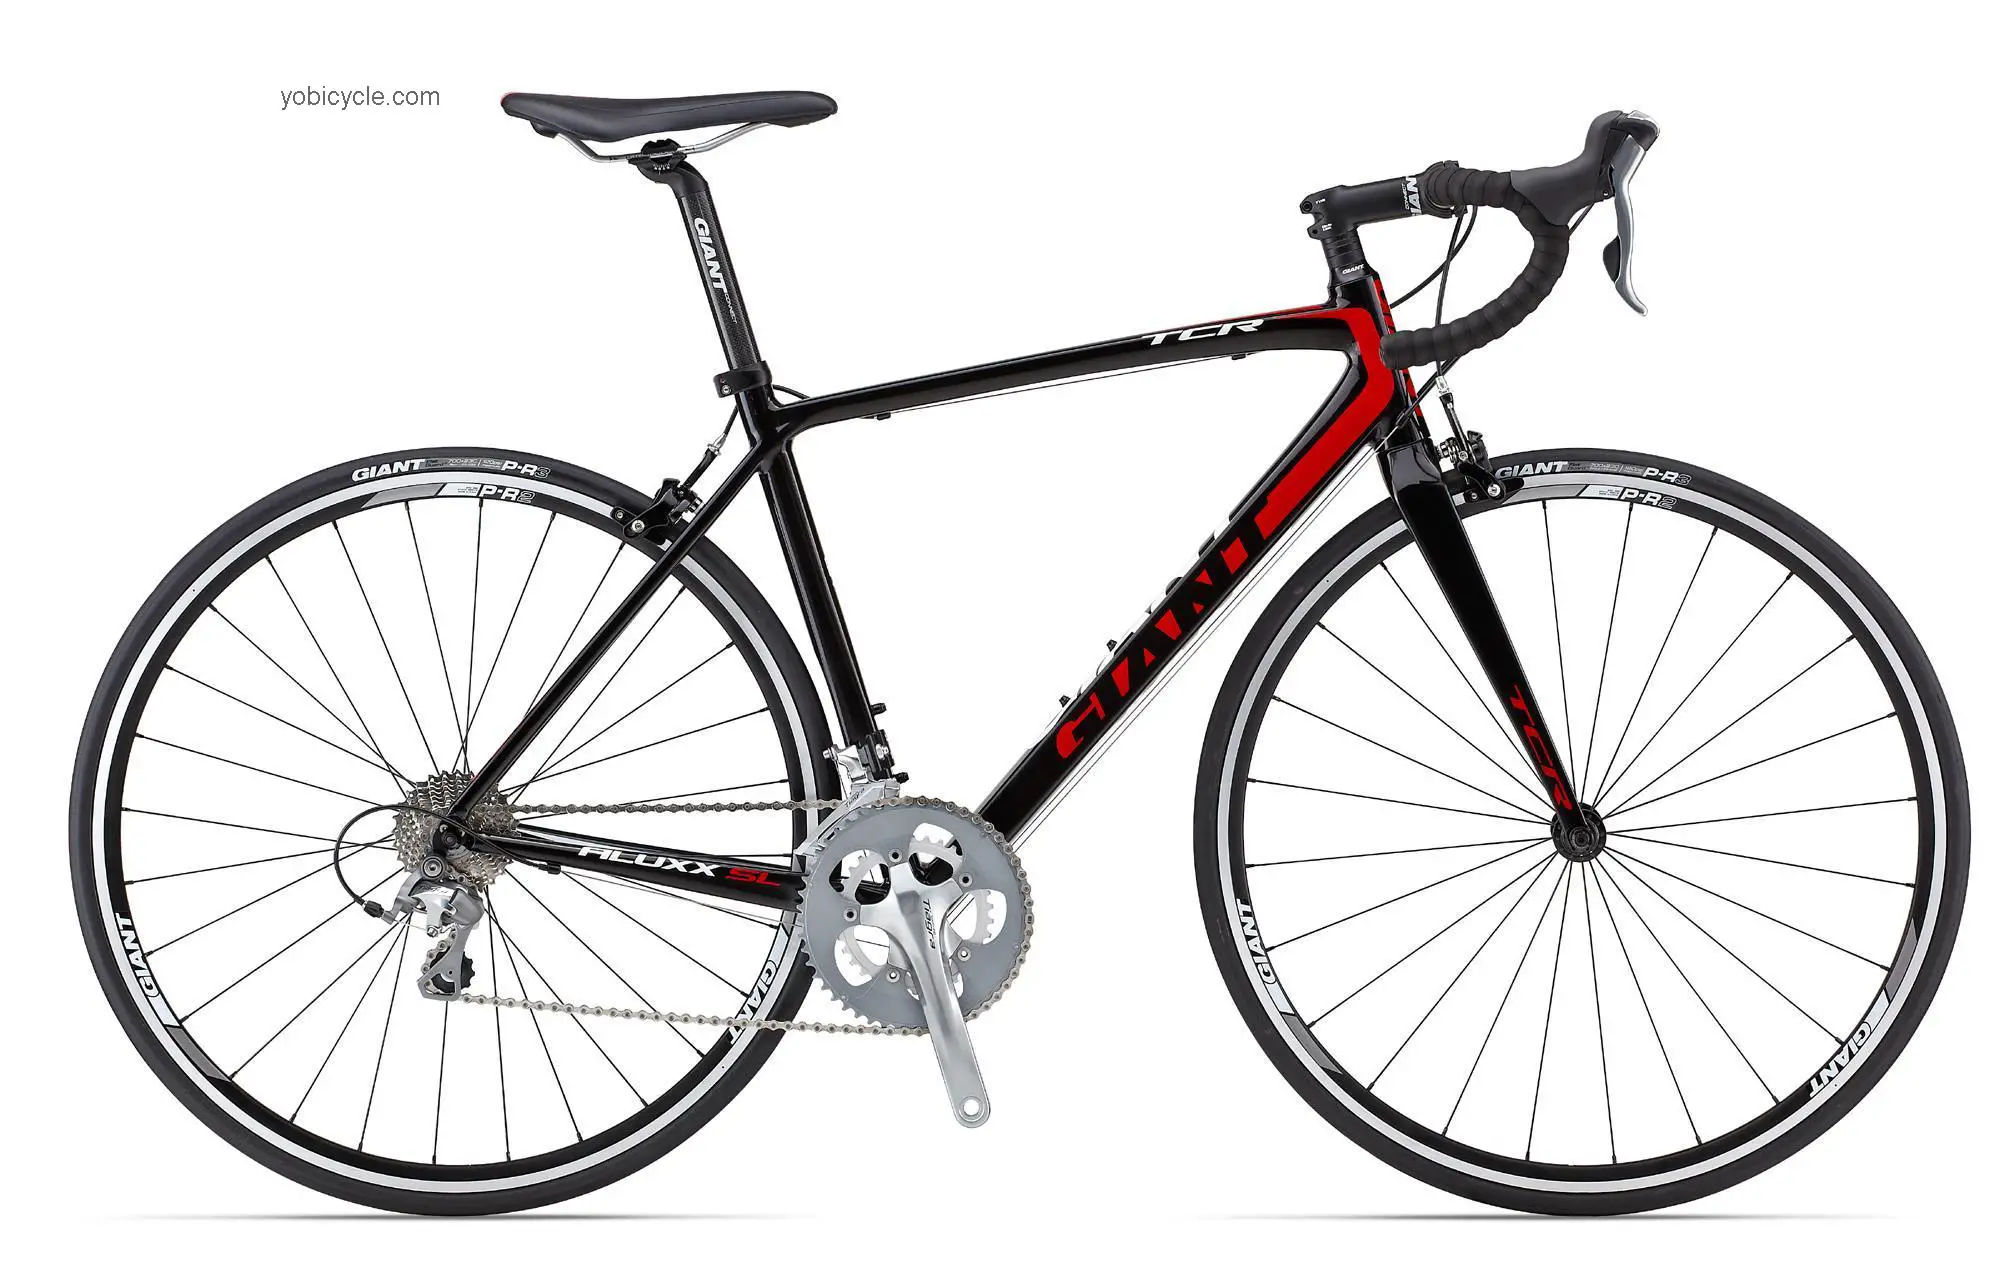 Giant TCR 2 2013 comparison online with competitors